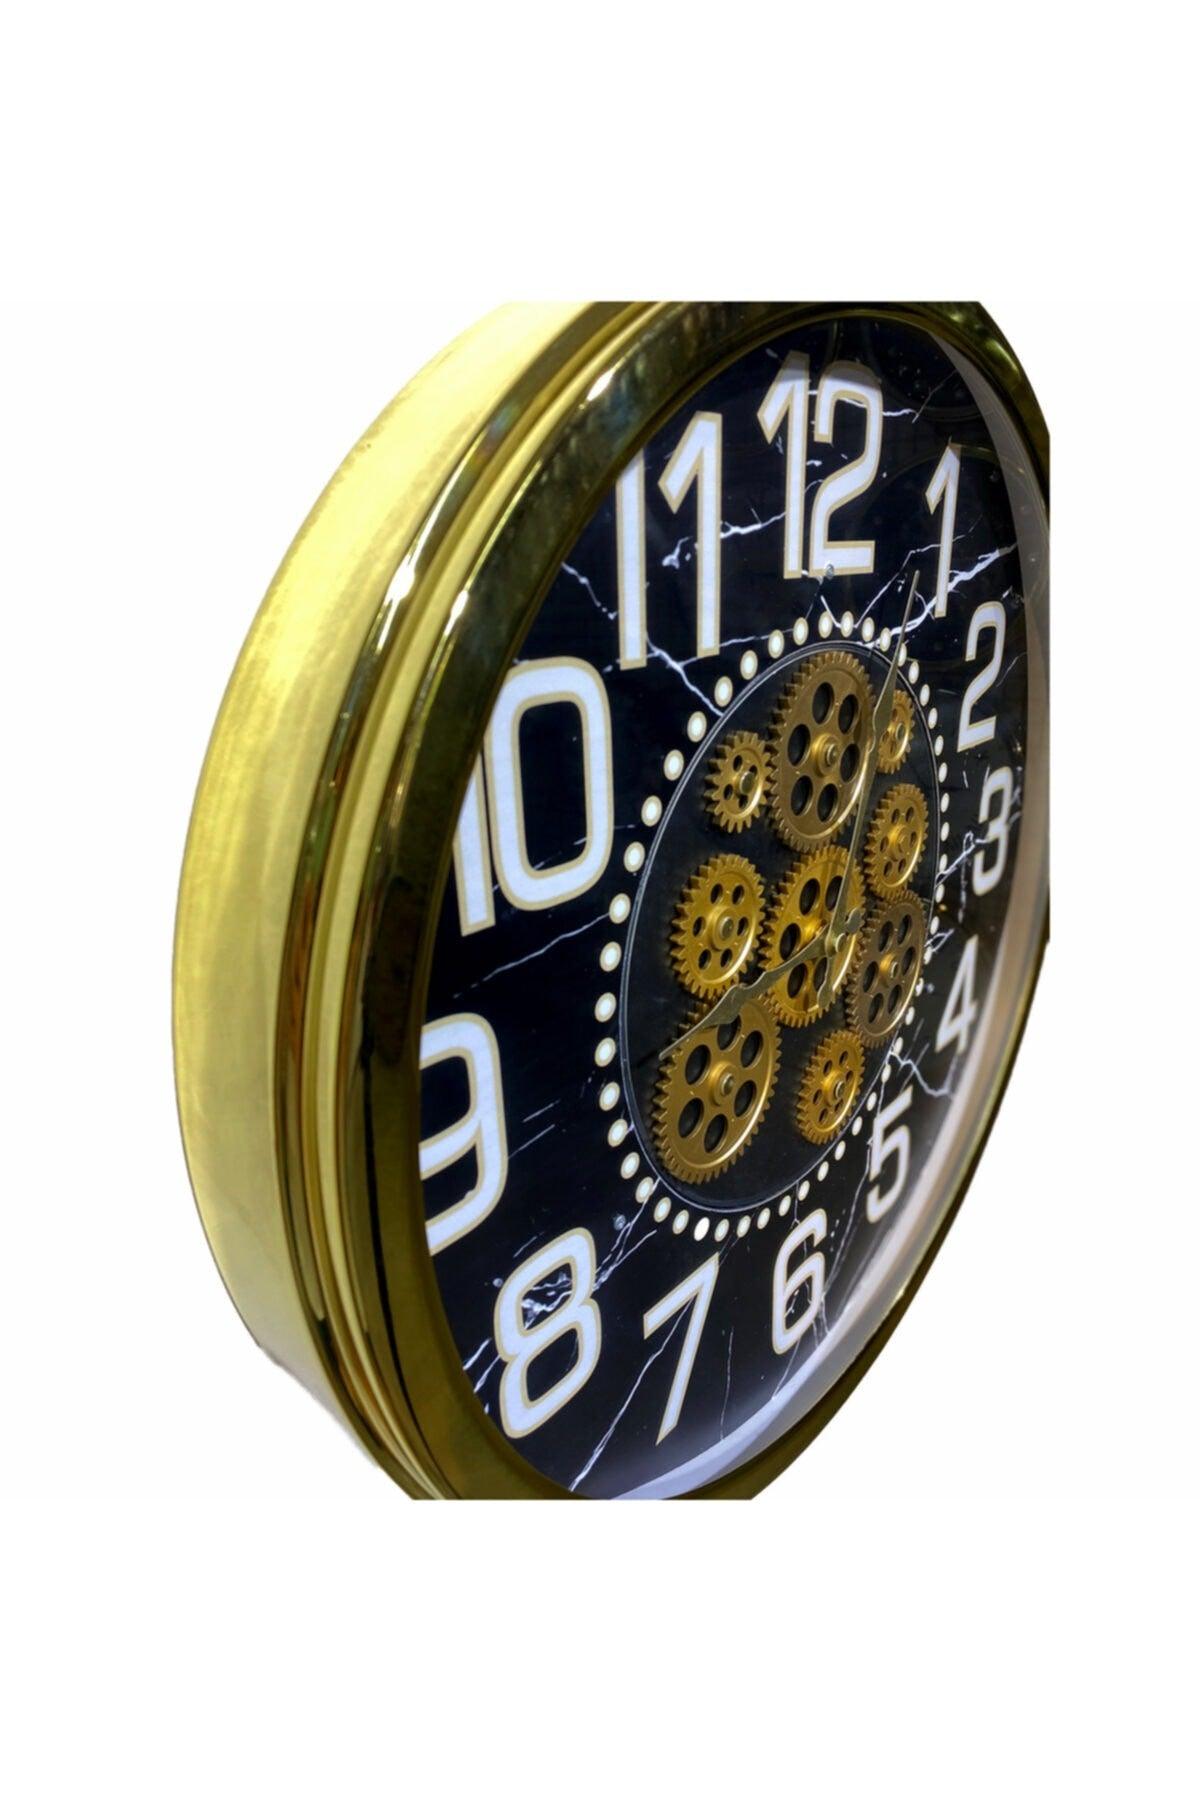 Metal Gold Plated Glass Wall Clock with Wheel - Swordslife